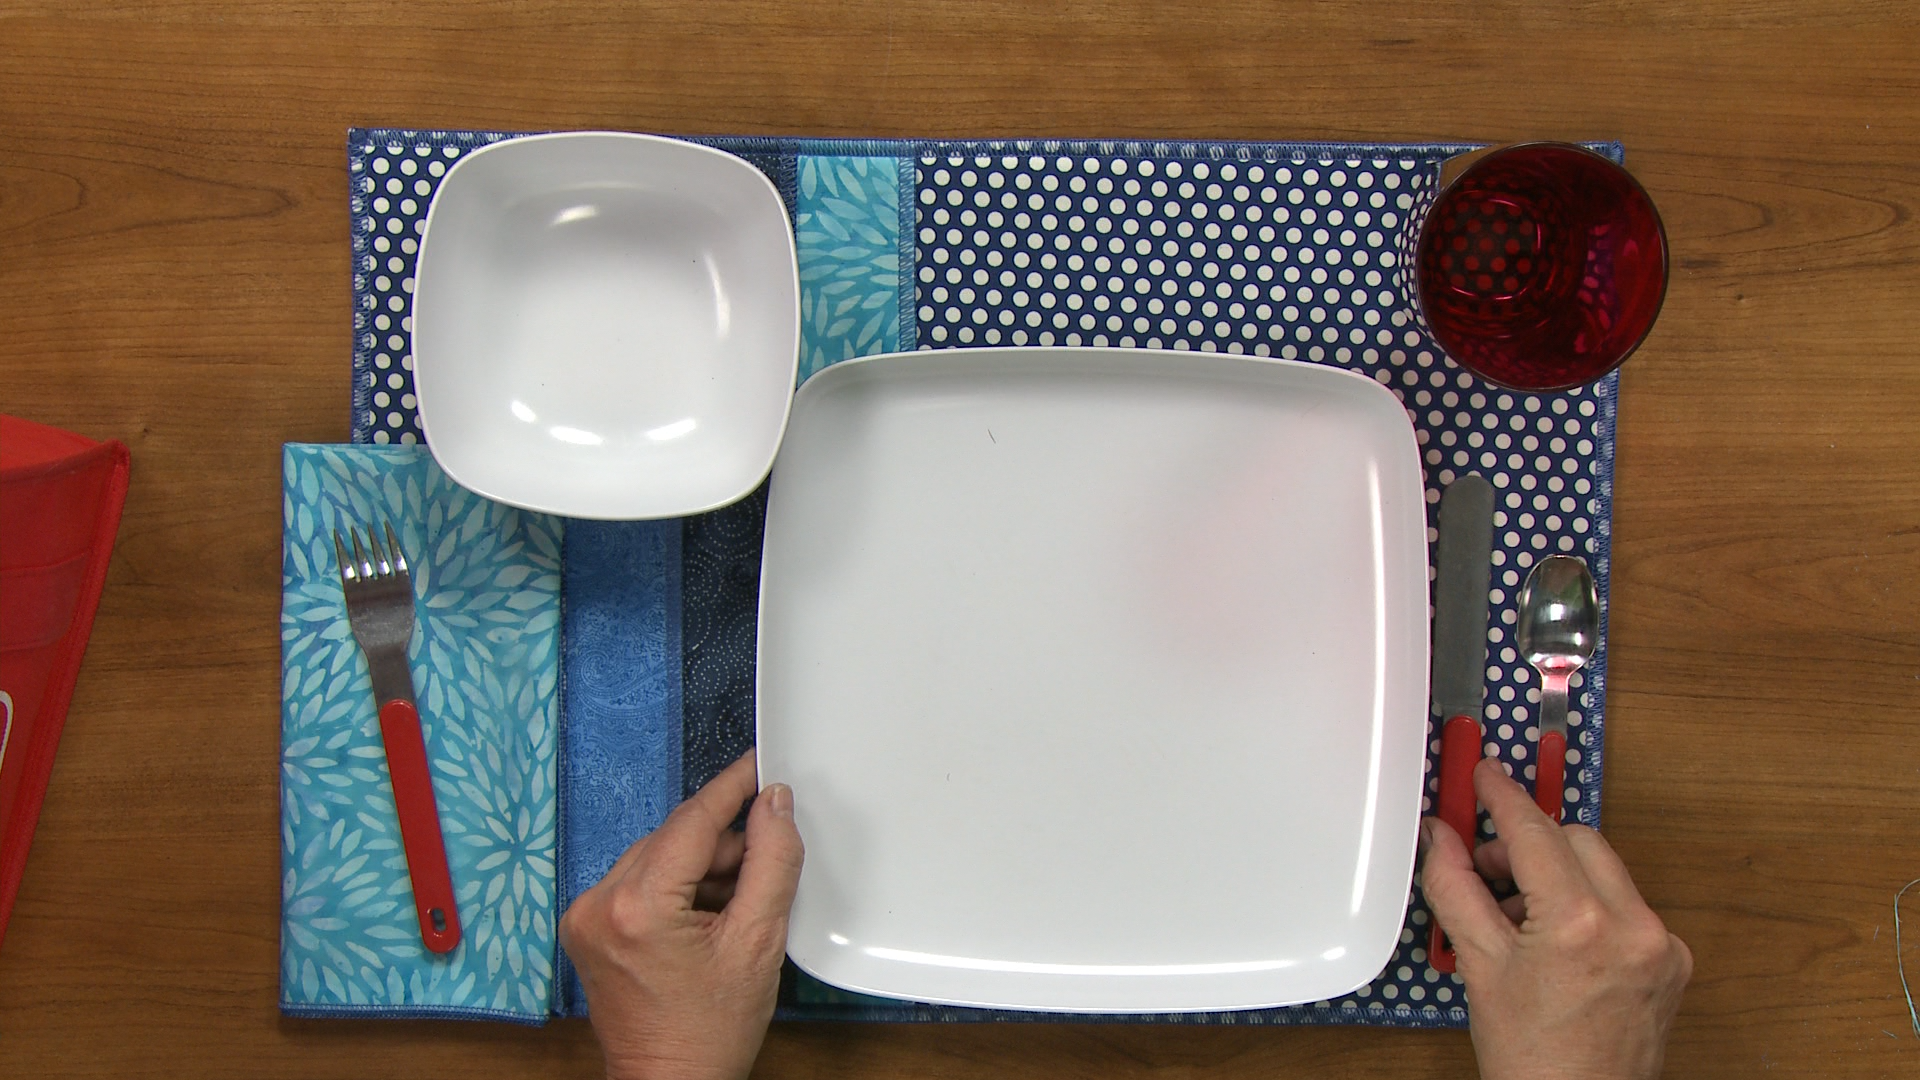 Session 7: Super Simple Placemat and Napkin